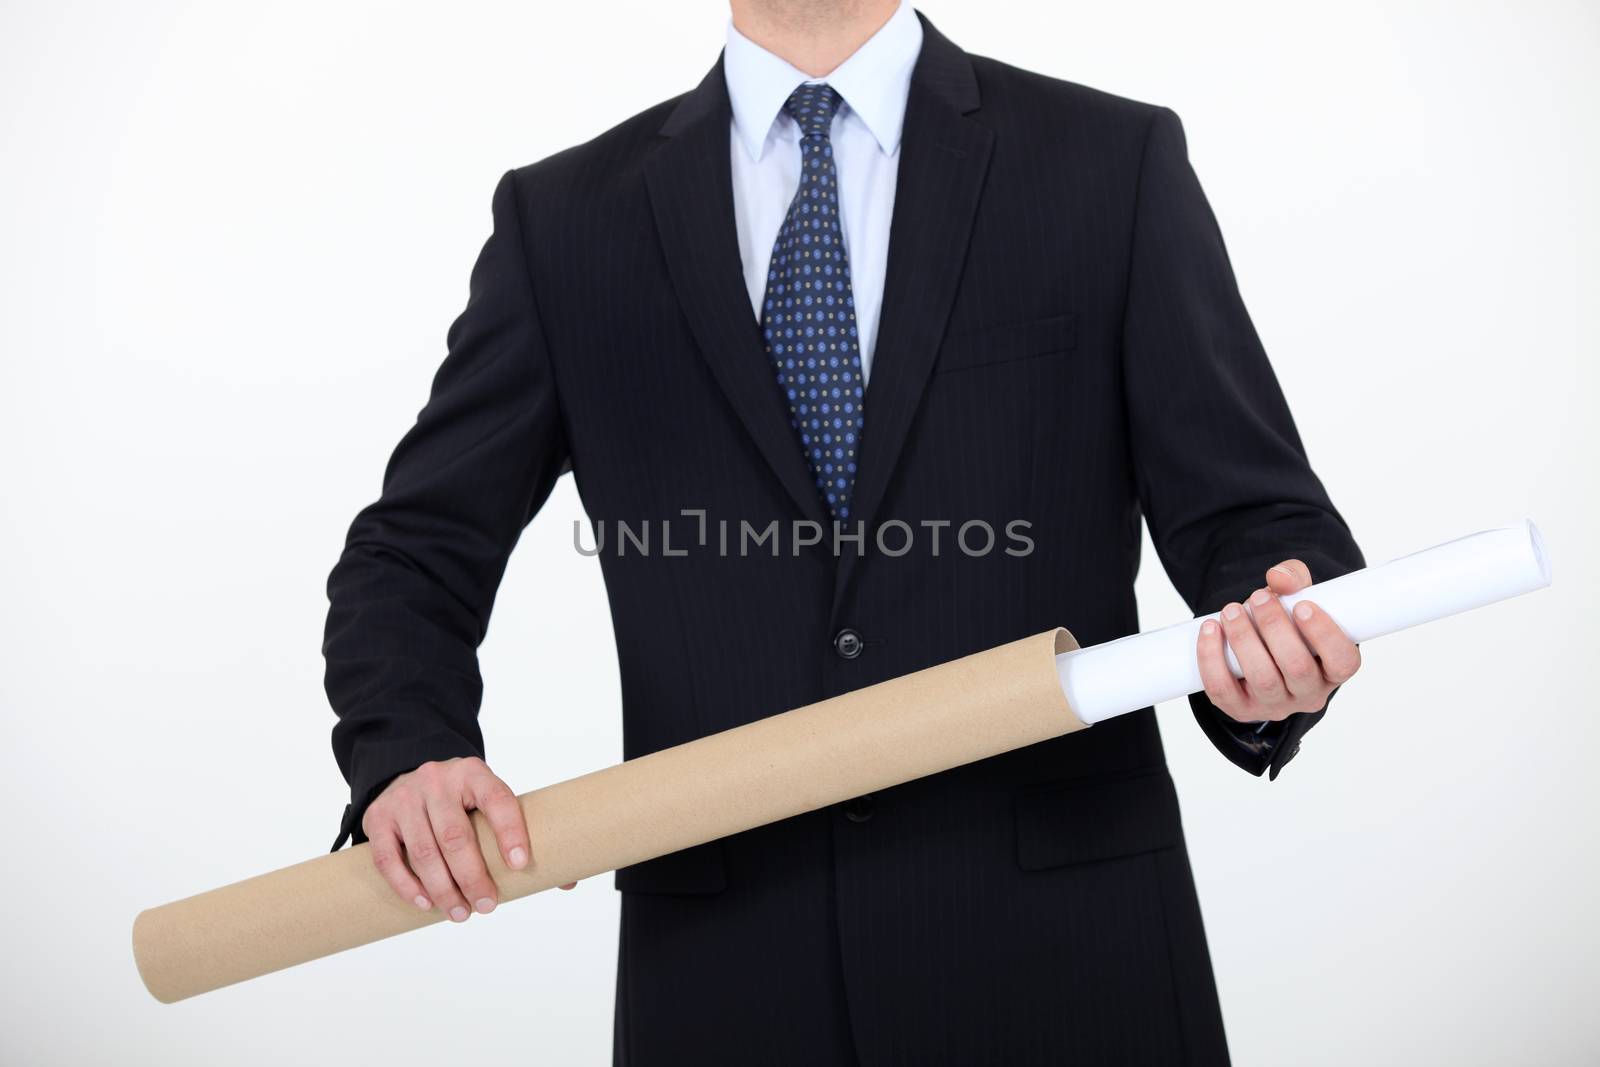 Architect with sheath in hands